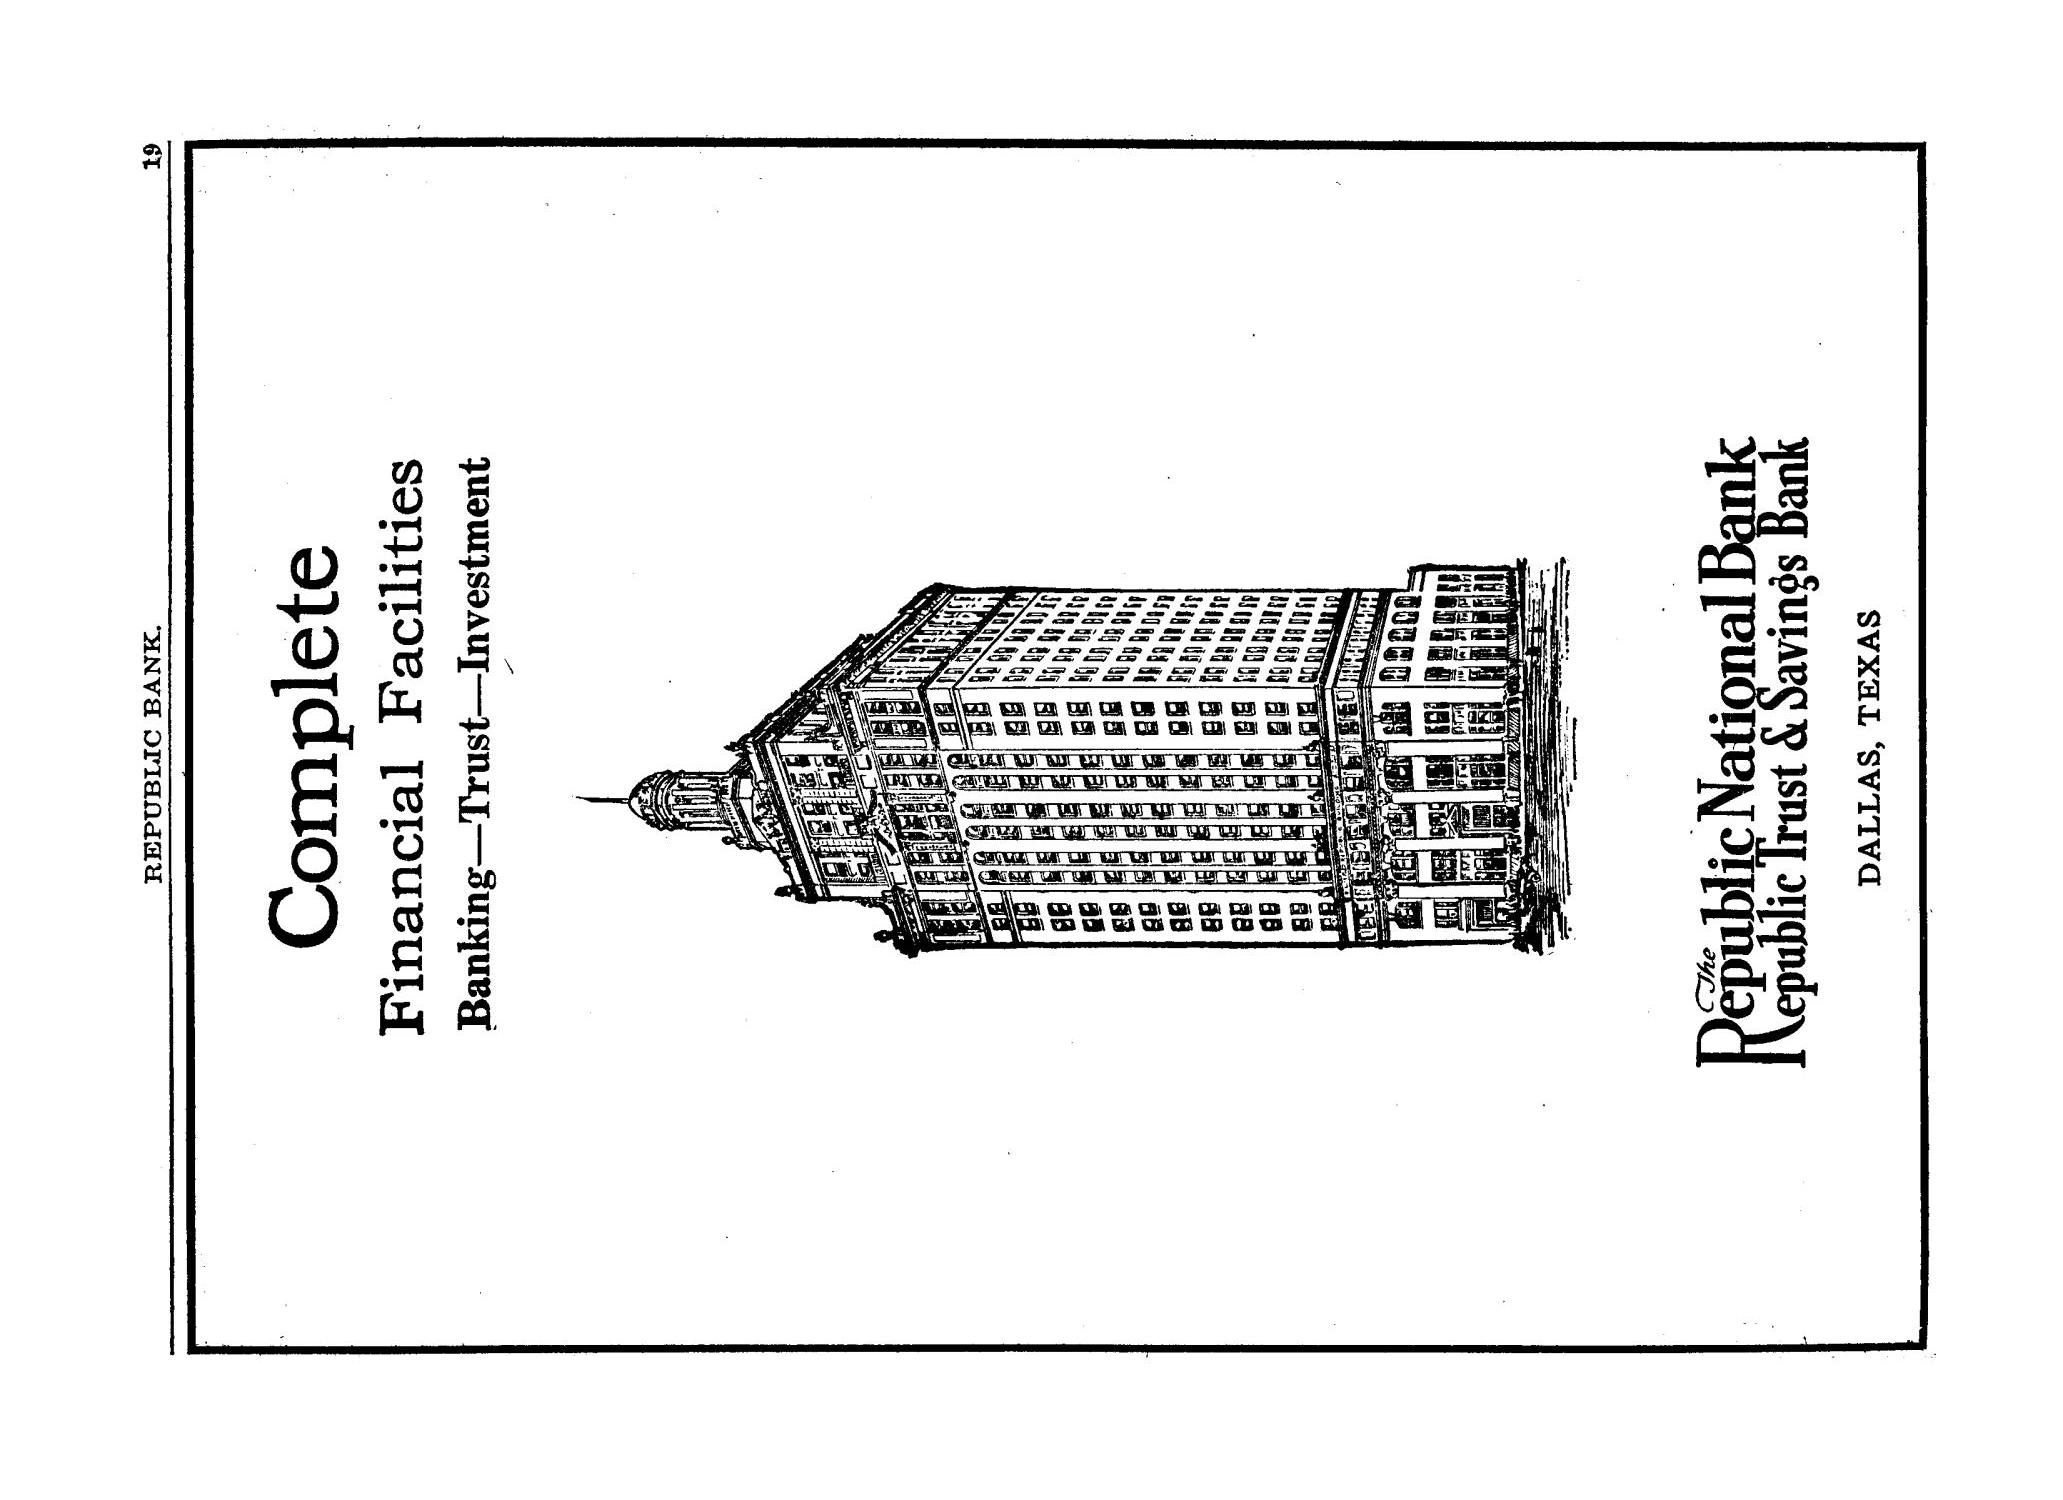 1927 The Texas Almanac and State Industrial Guide
                                                
                                                    19
                                                